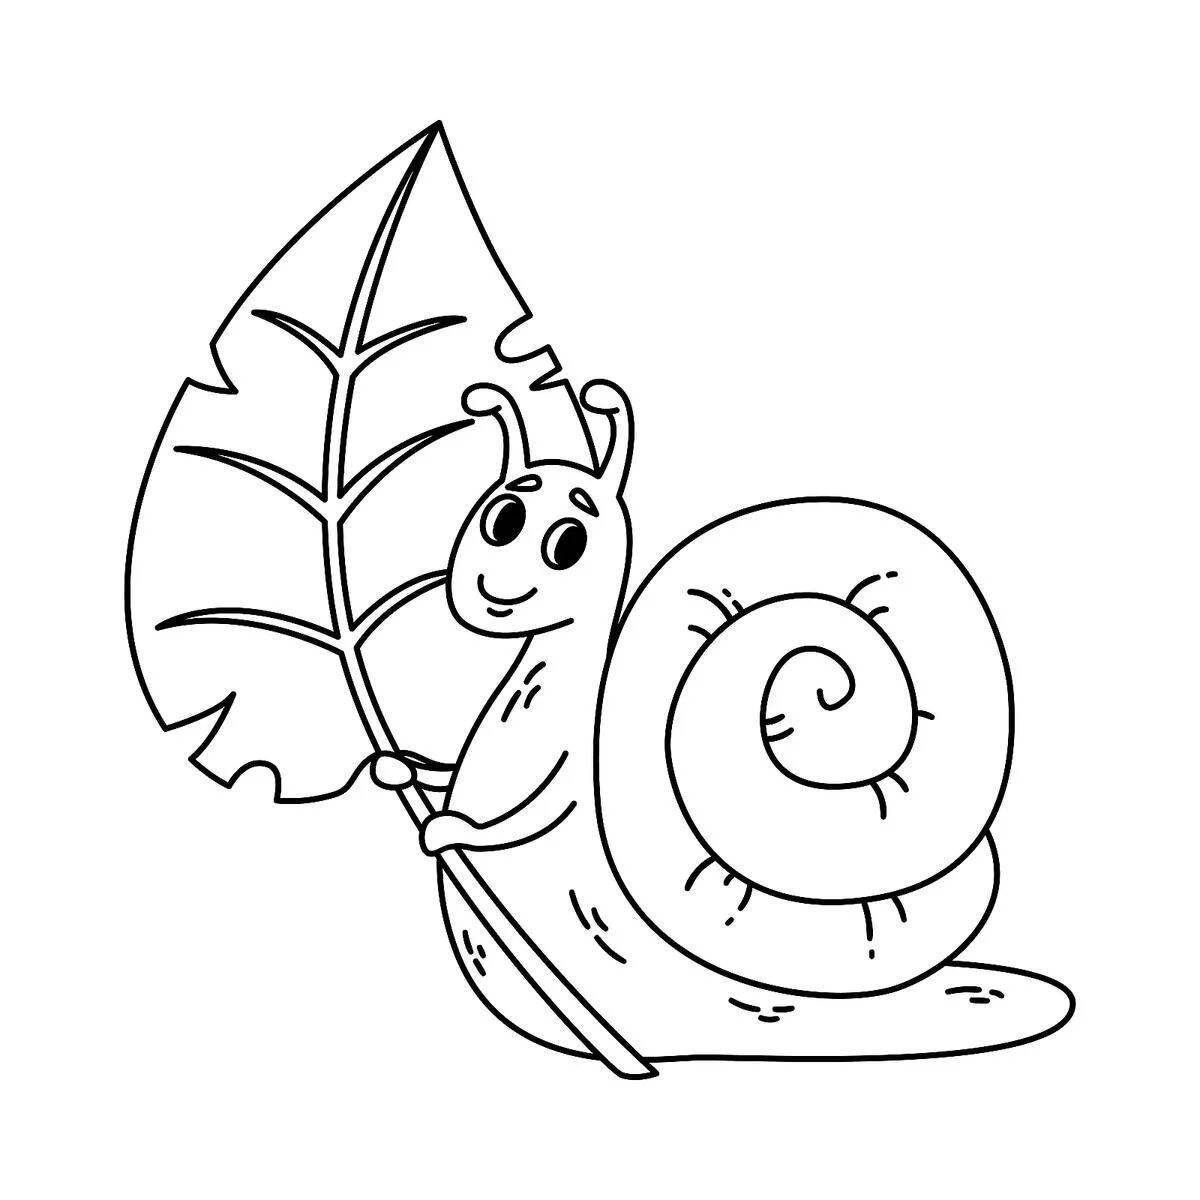 An interesting snail coloring page for 5-6 year olds